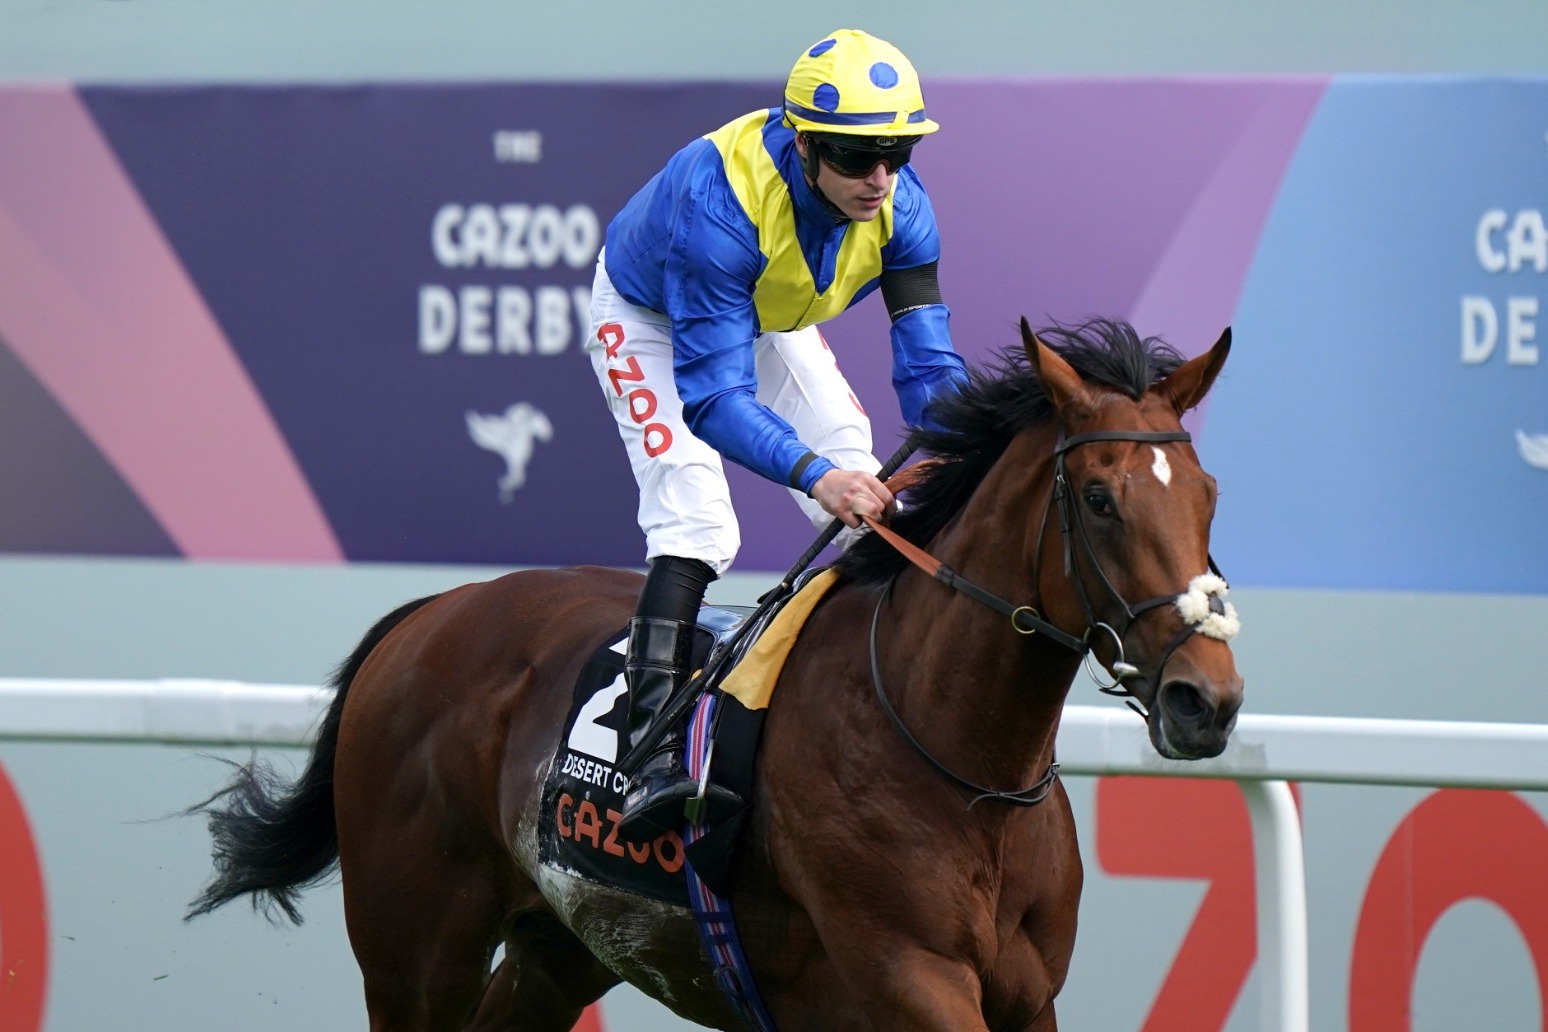 Desert Crown storms to glorious victory in Epsom Derby 